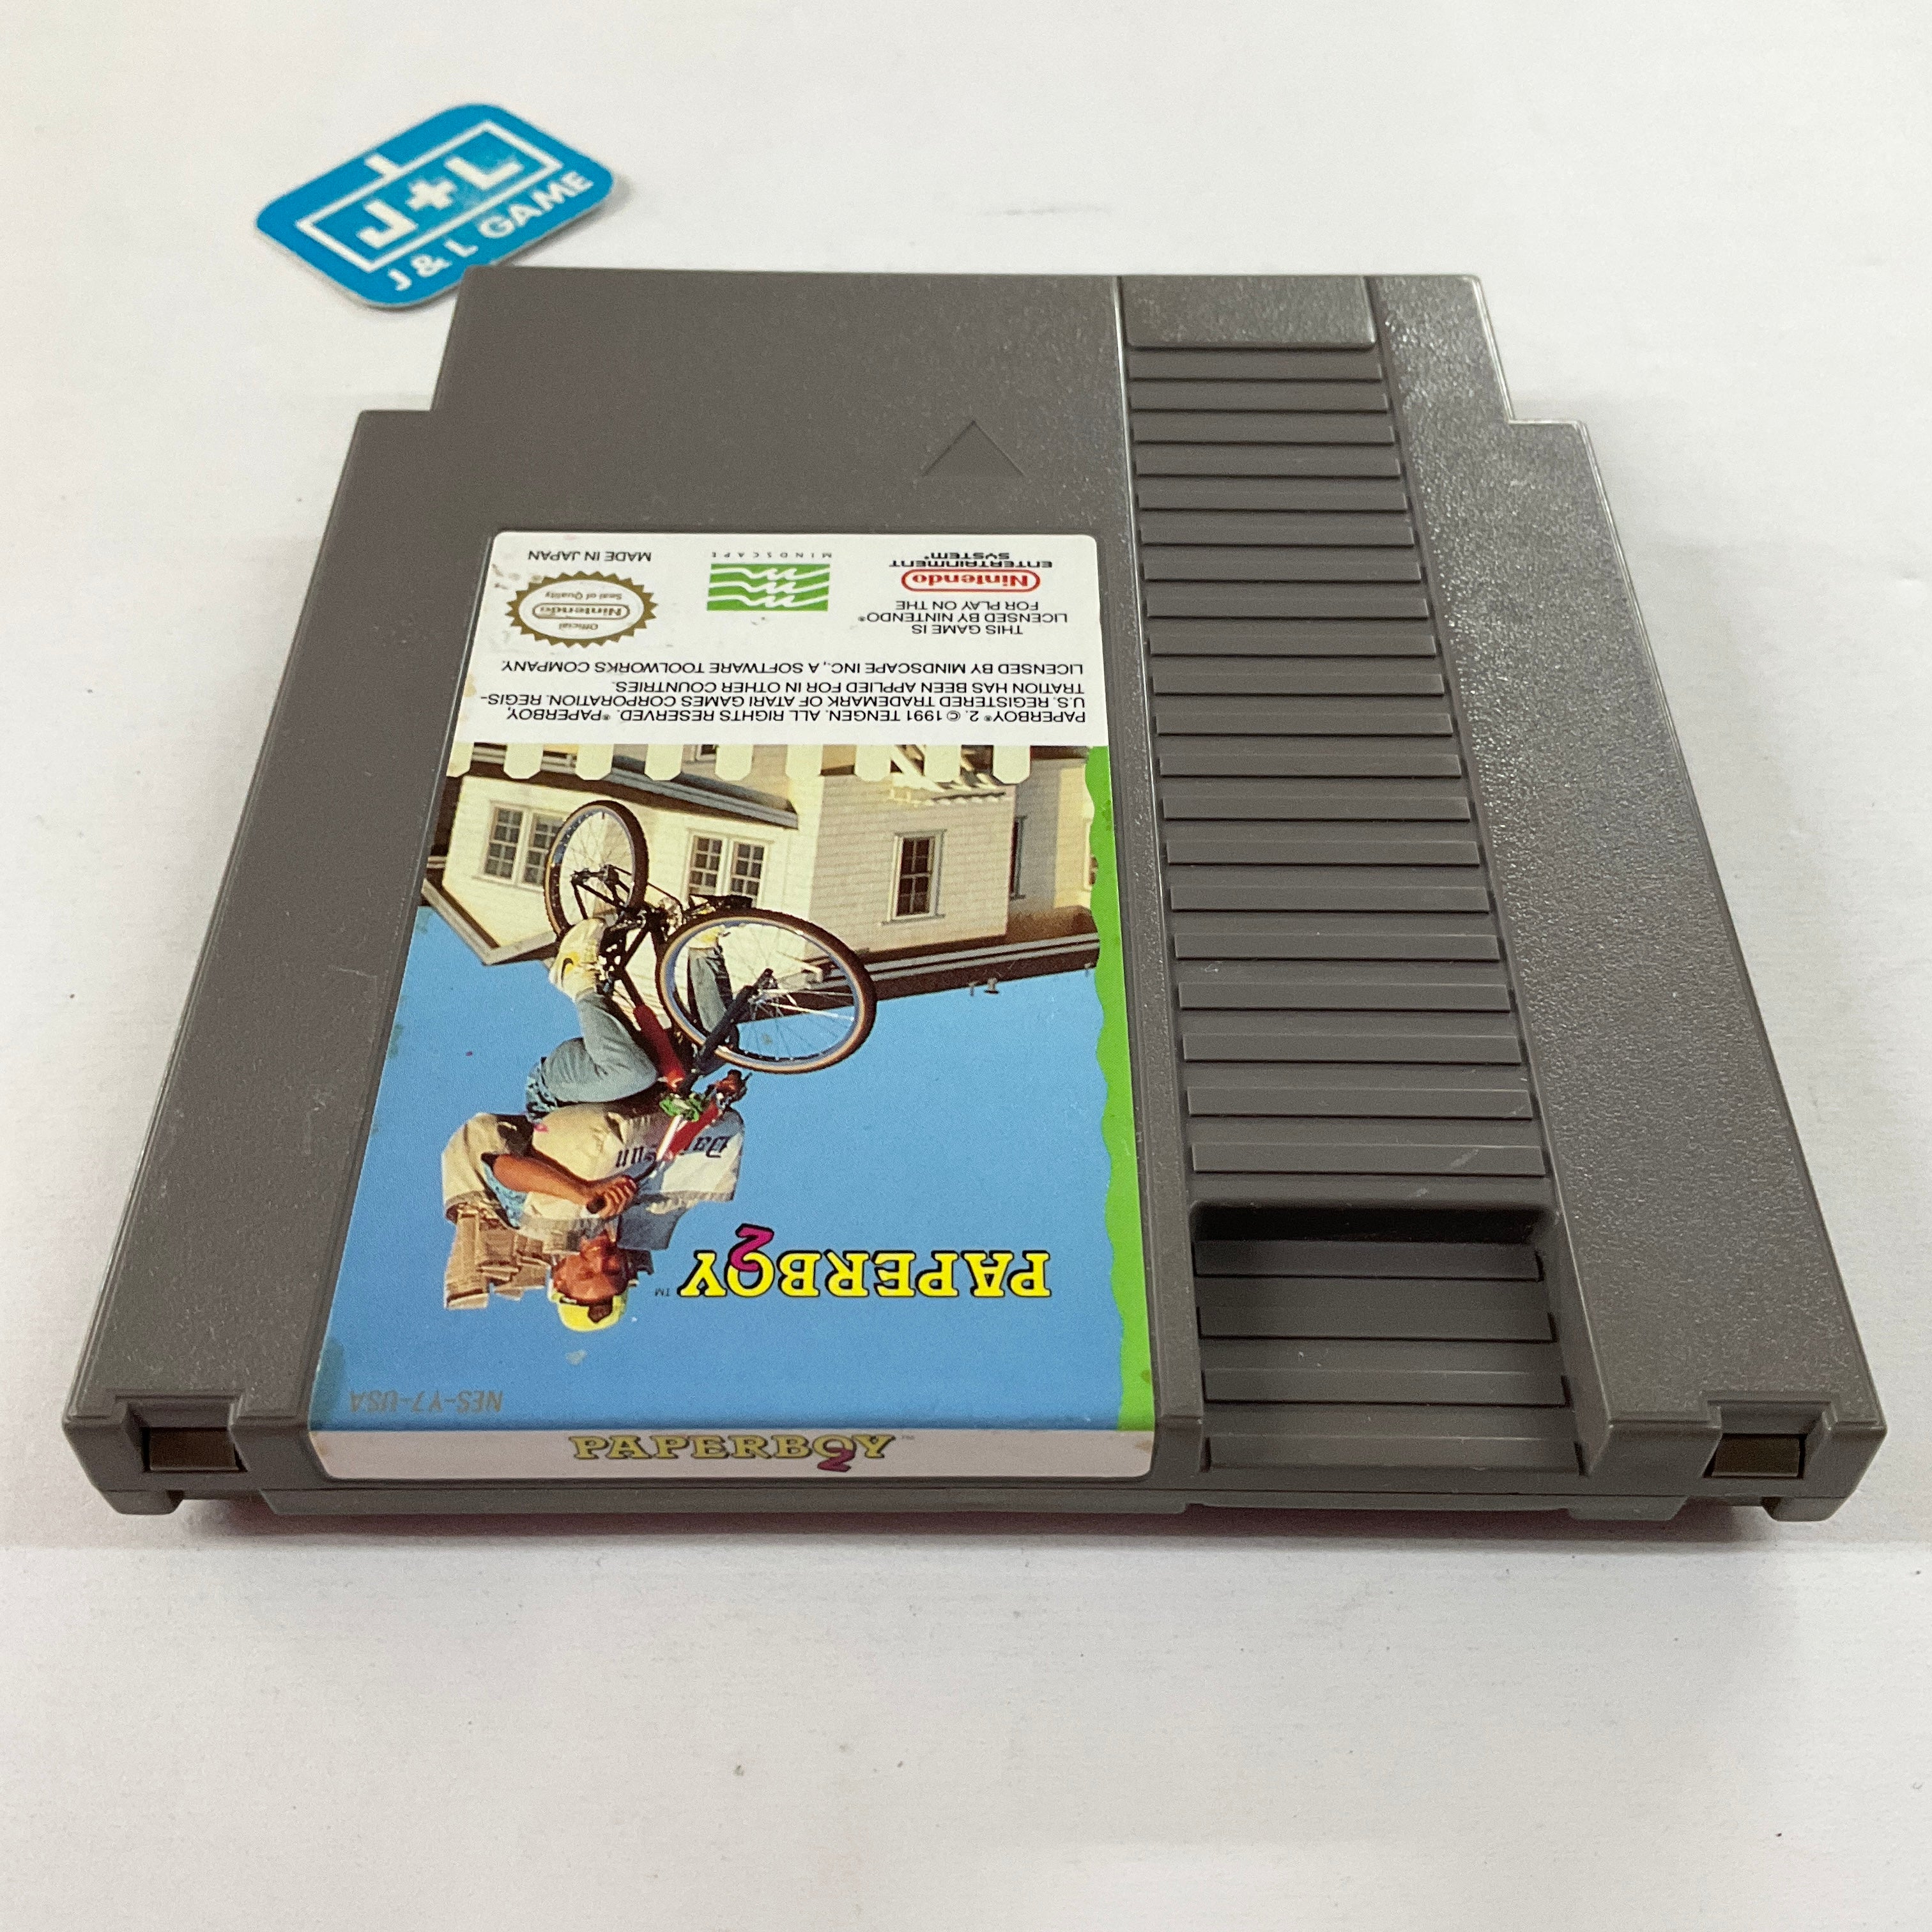 Paperboy 2 - (NES) Nintendo Entertainment System [Pre-Owned] Video Games Mindscape   